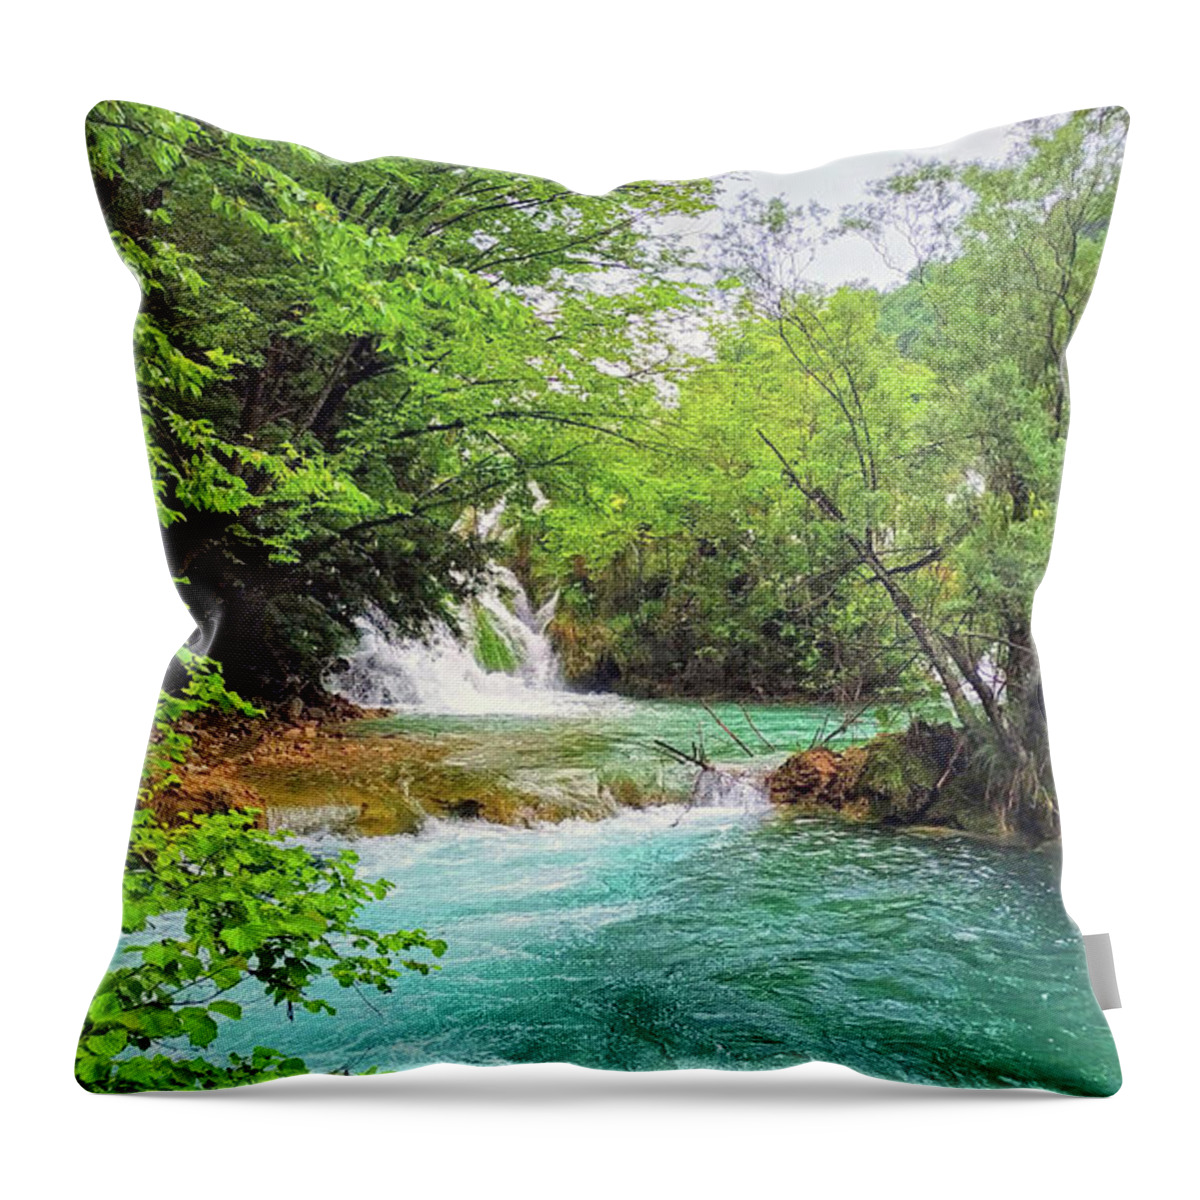 Waterfall Throw Pillow featuring the photograph Sunny Day at the Forest Waterfall by Alex Mir